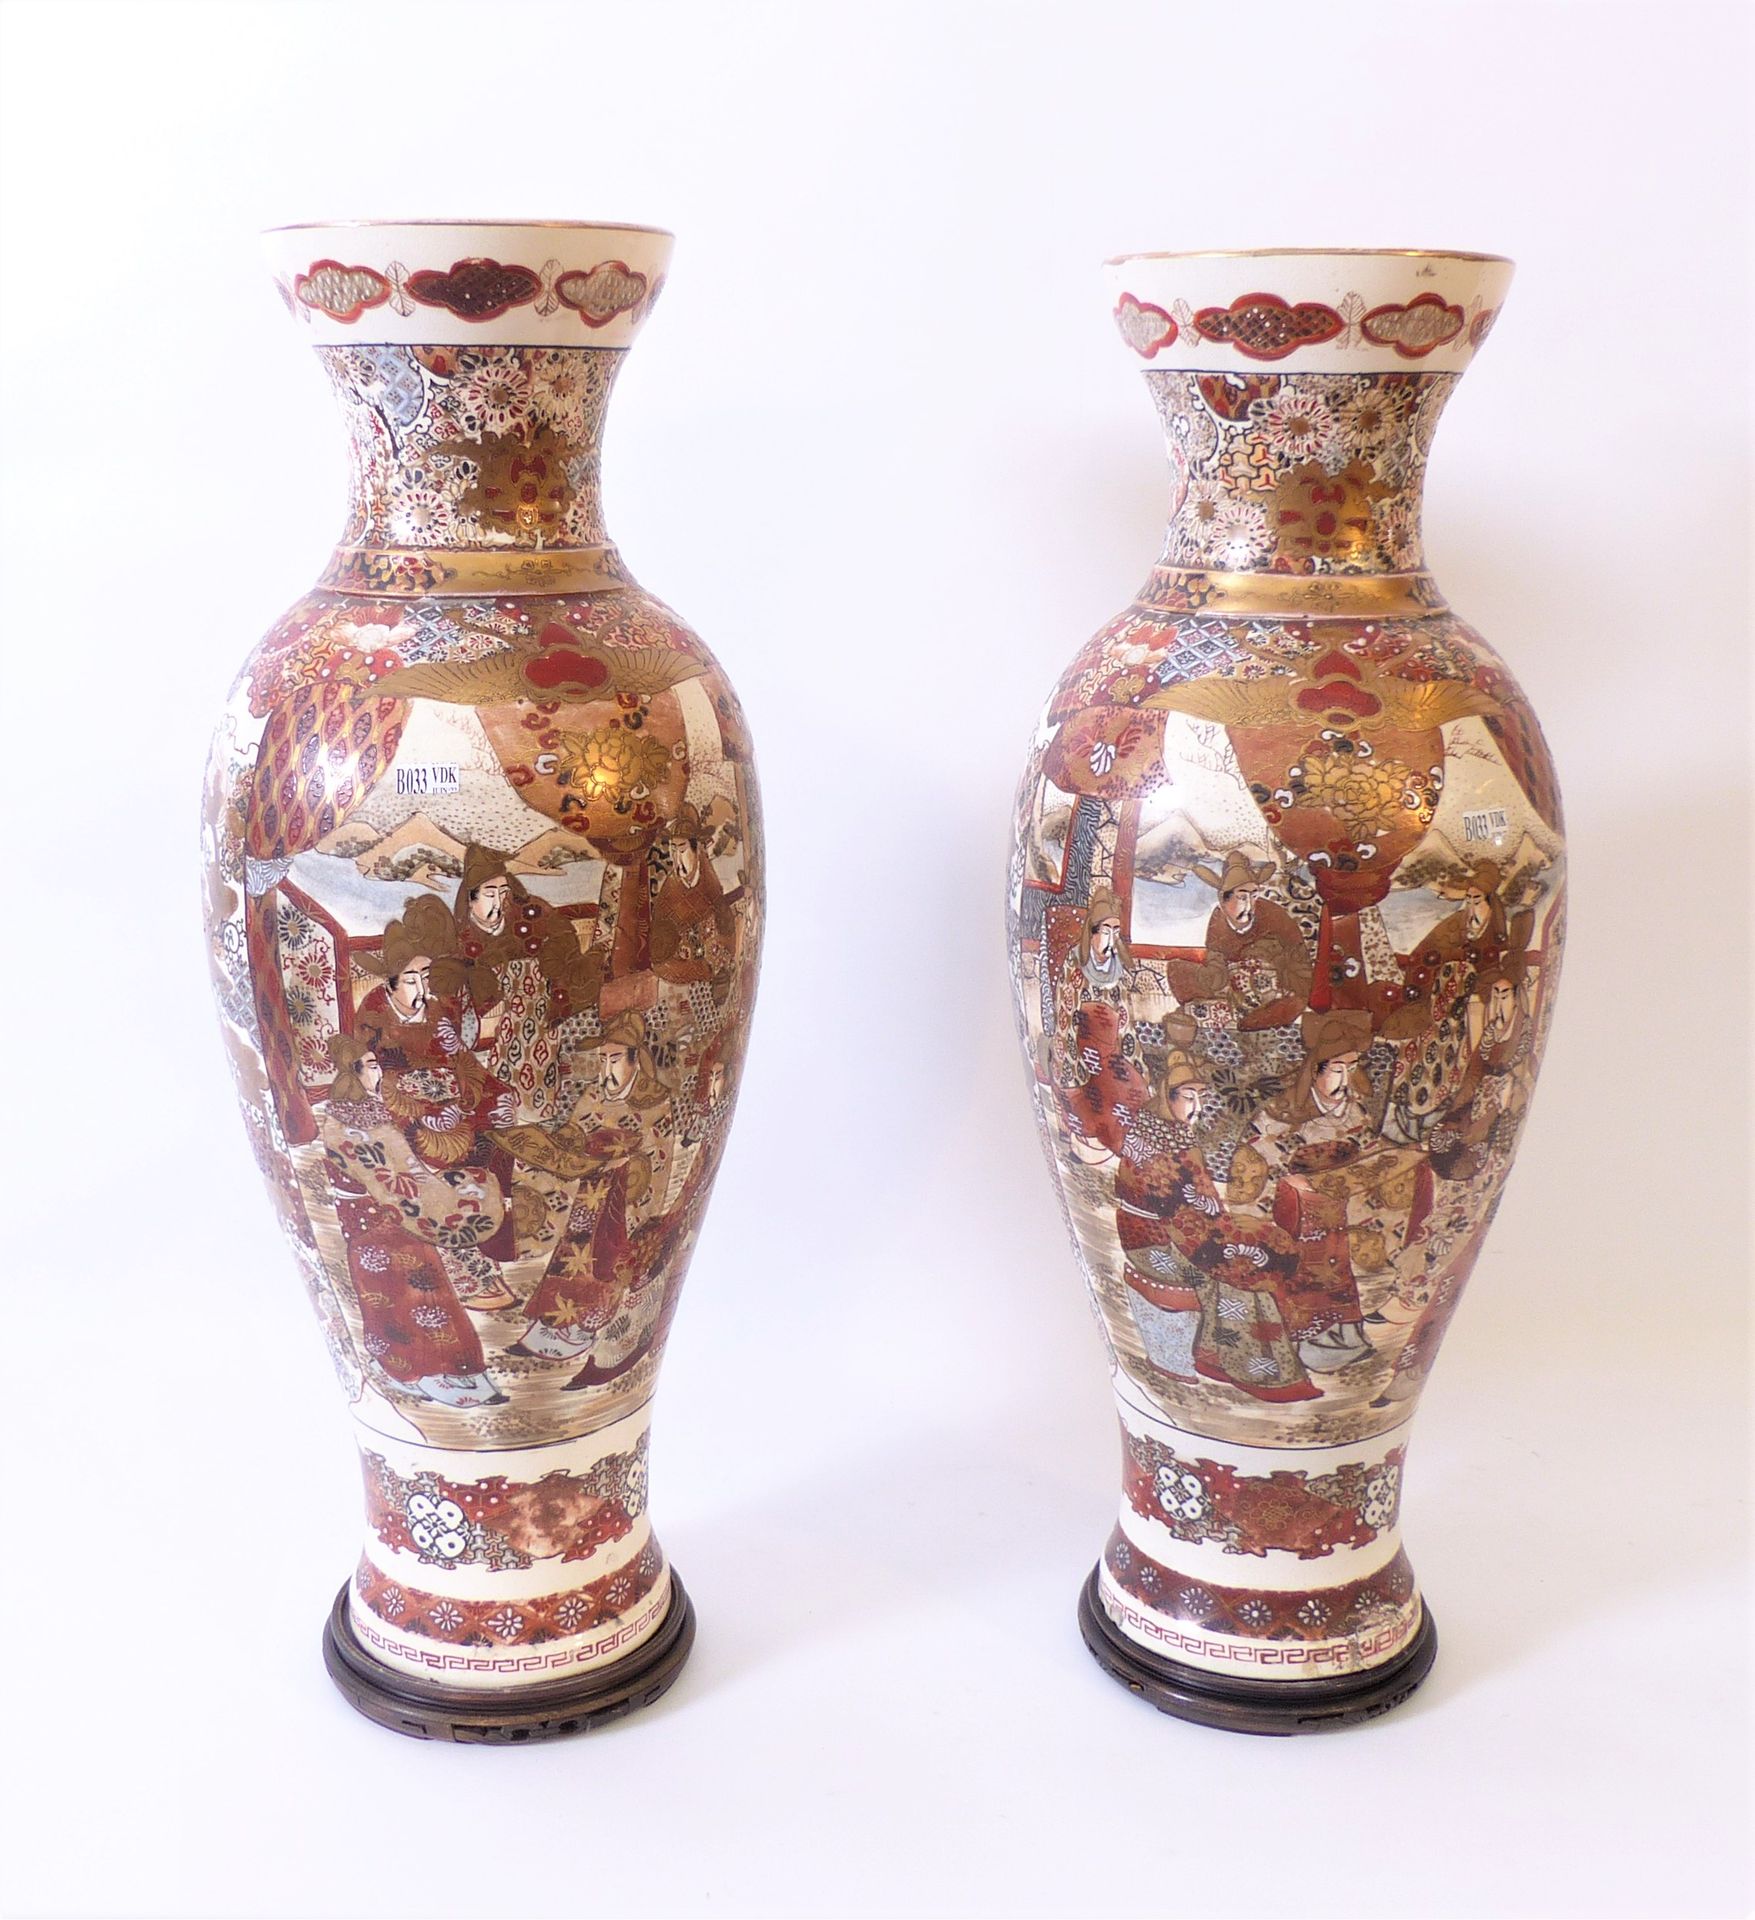 Null A pair of large Satsuma earthenware vases Japan. About 1900 (*) H: 64 cm.